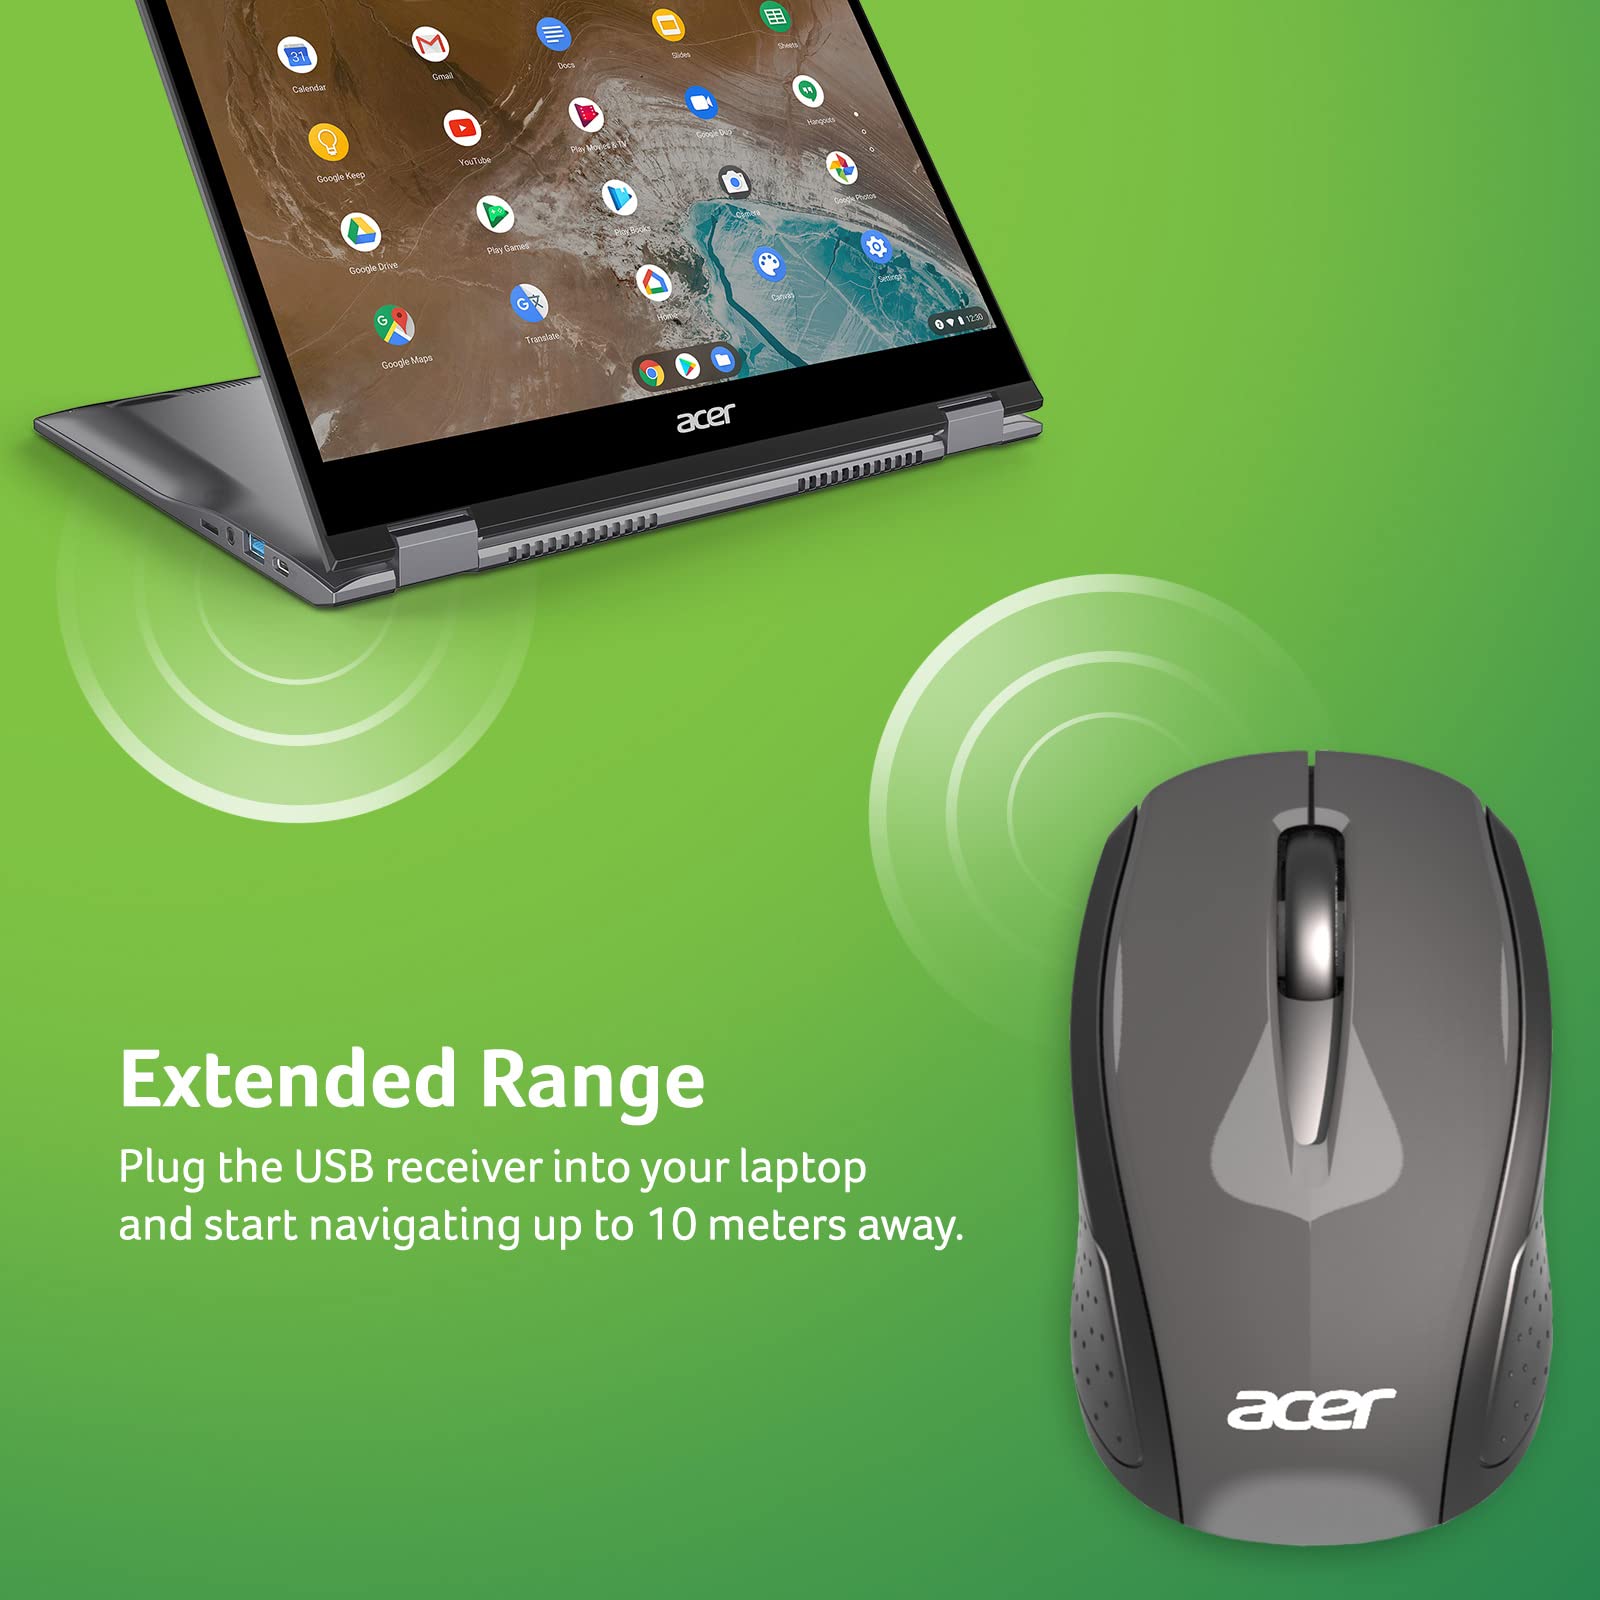 Plug the USB or wireless receiver of the external mouse into an available port on your Acer laptop.
If using a wireless mouse, make sure the batteries are fresh and the mouse is turned on.